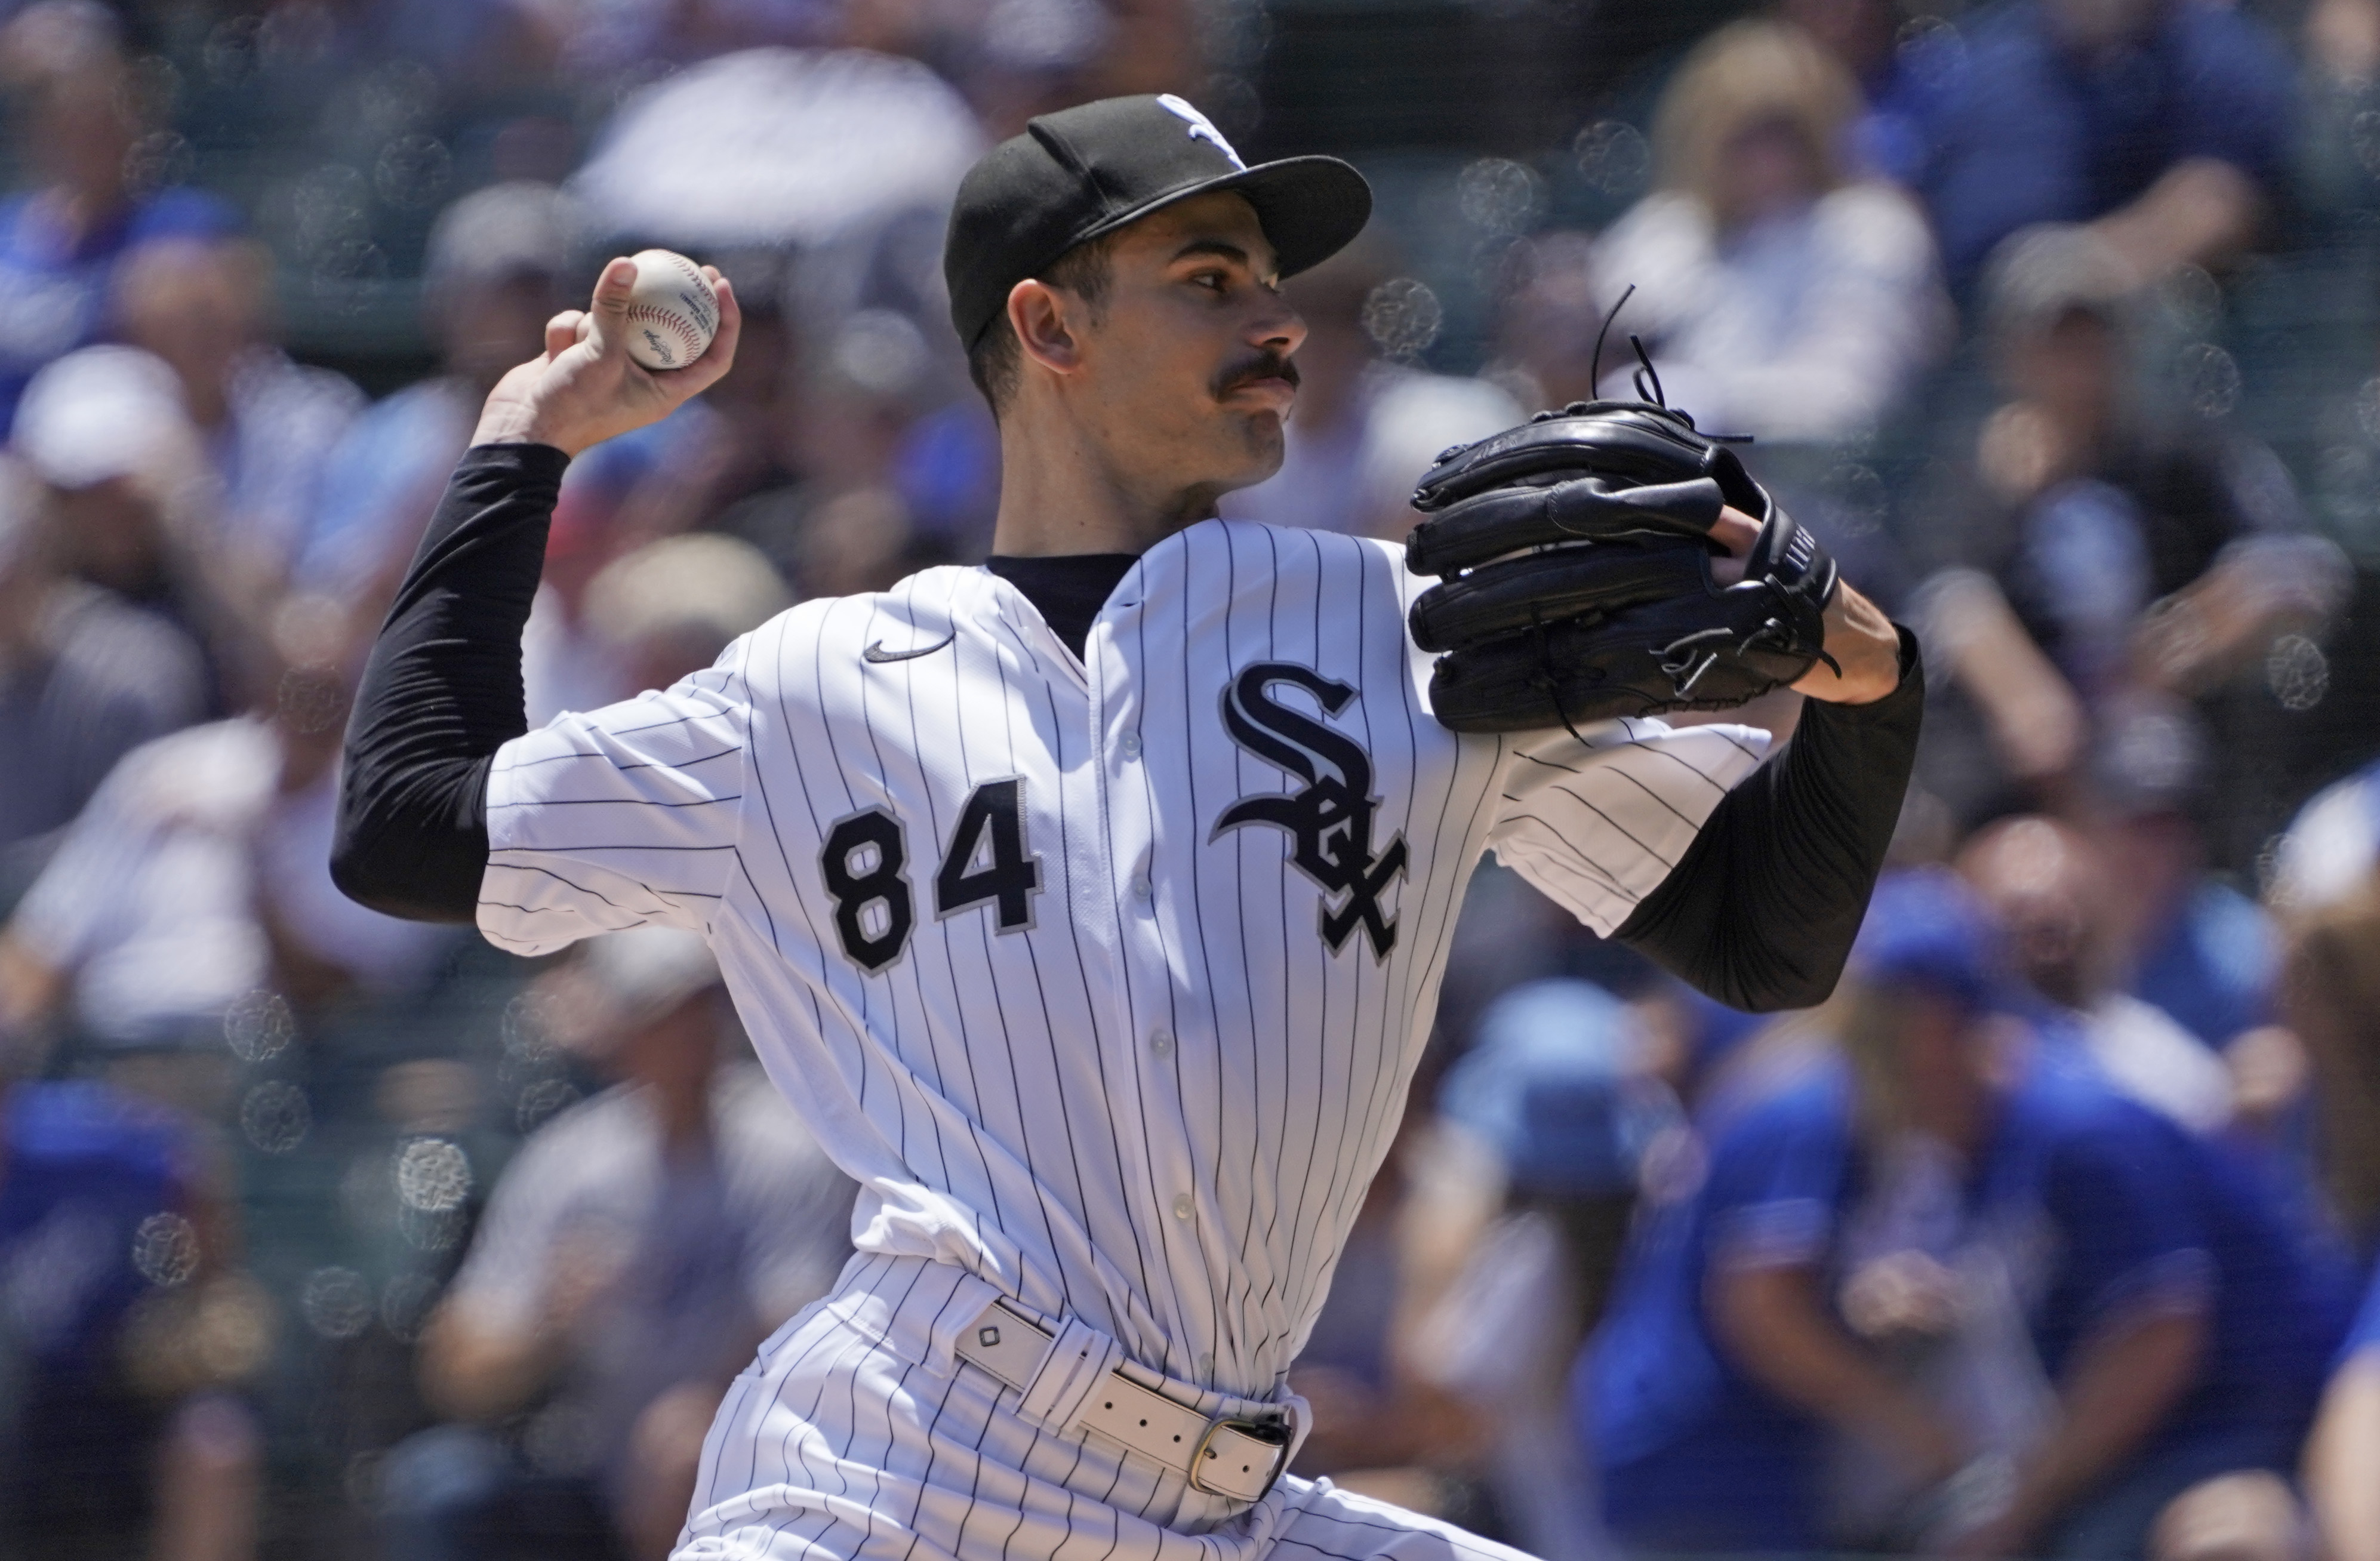 MLB: Los Angeles Dodgers at Chicago White Sox